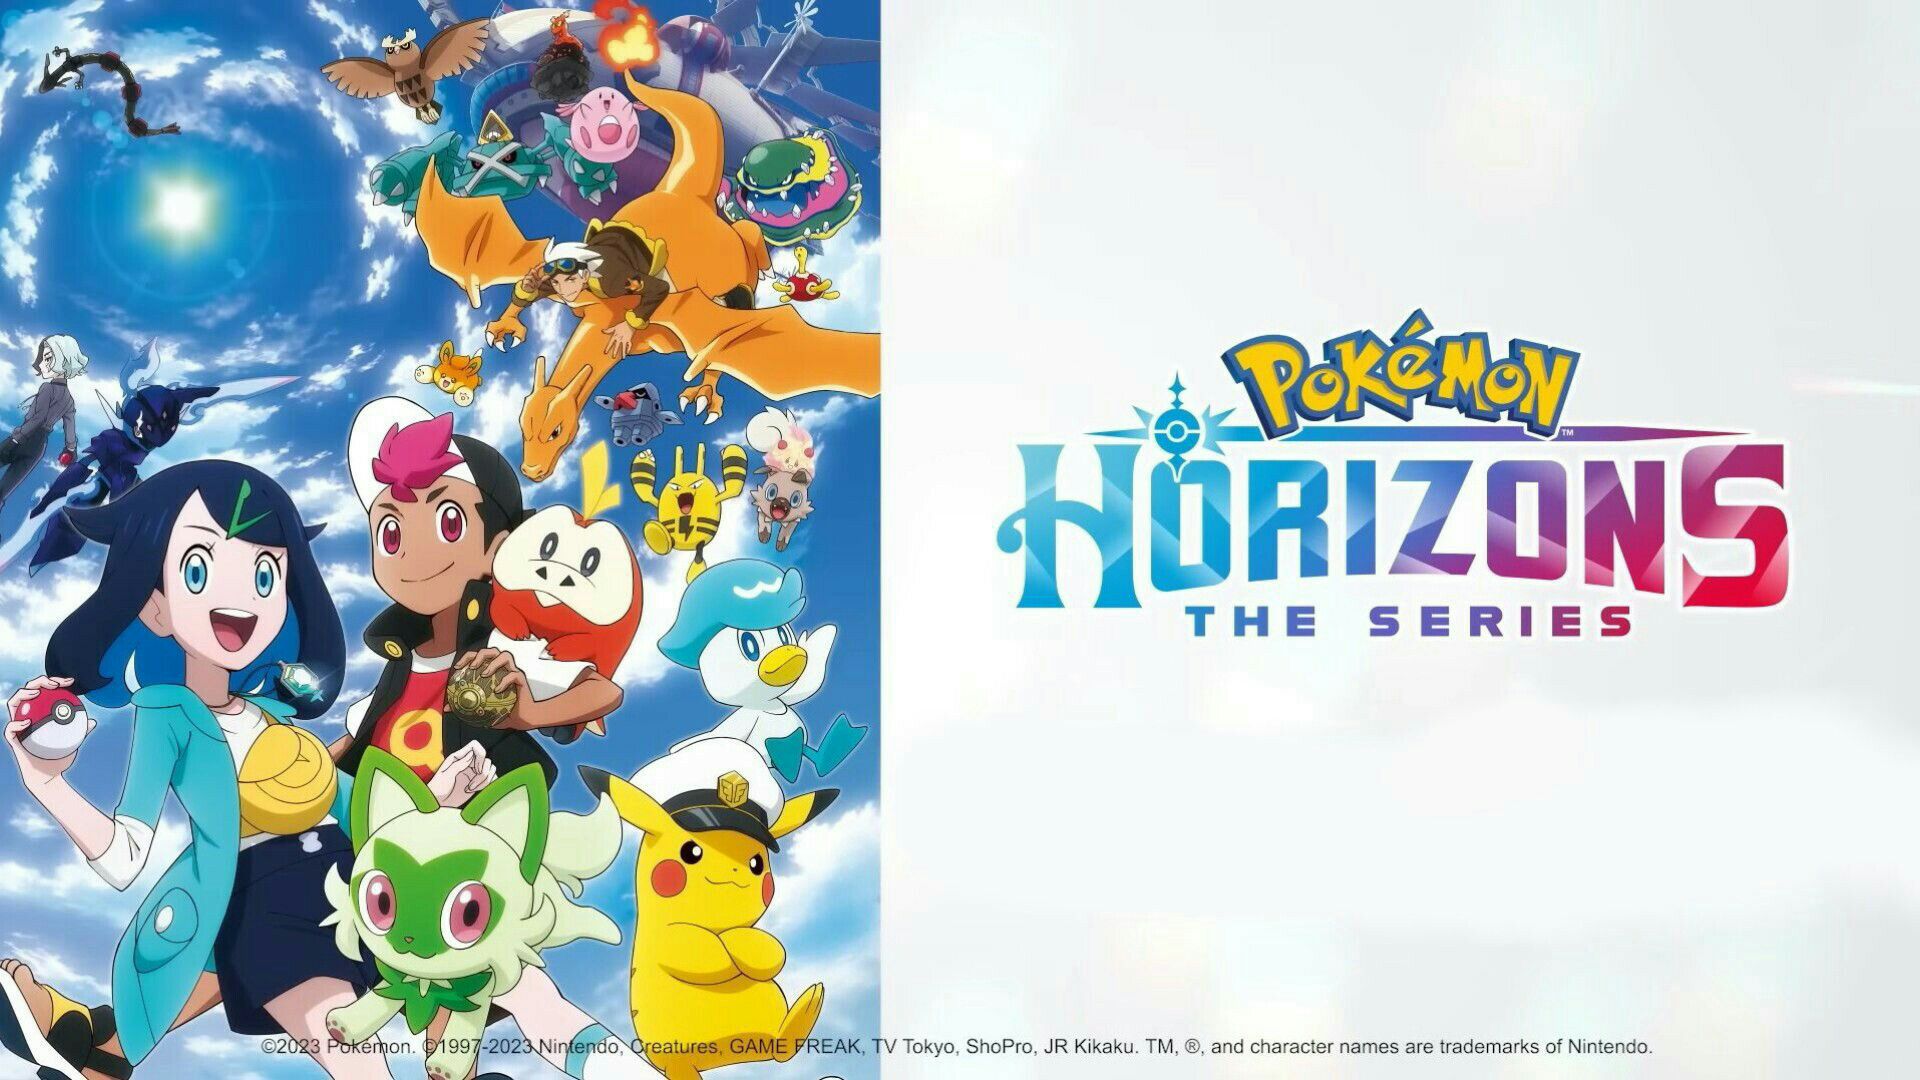 Pokemon Horizons The Series Episode 24 Full Preview With English Subtitles  In HD!! Air Date:- Oct 13th 2023! Credit Goes To Me(…